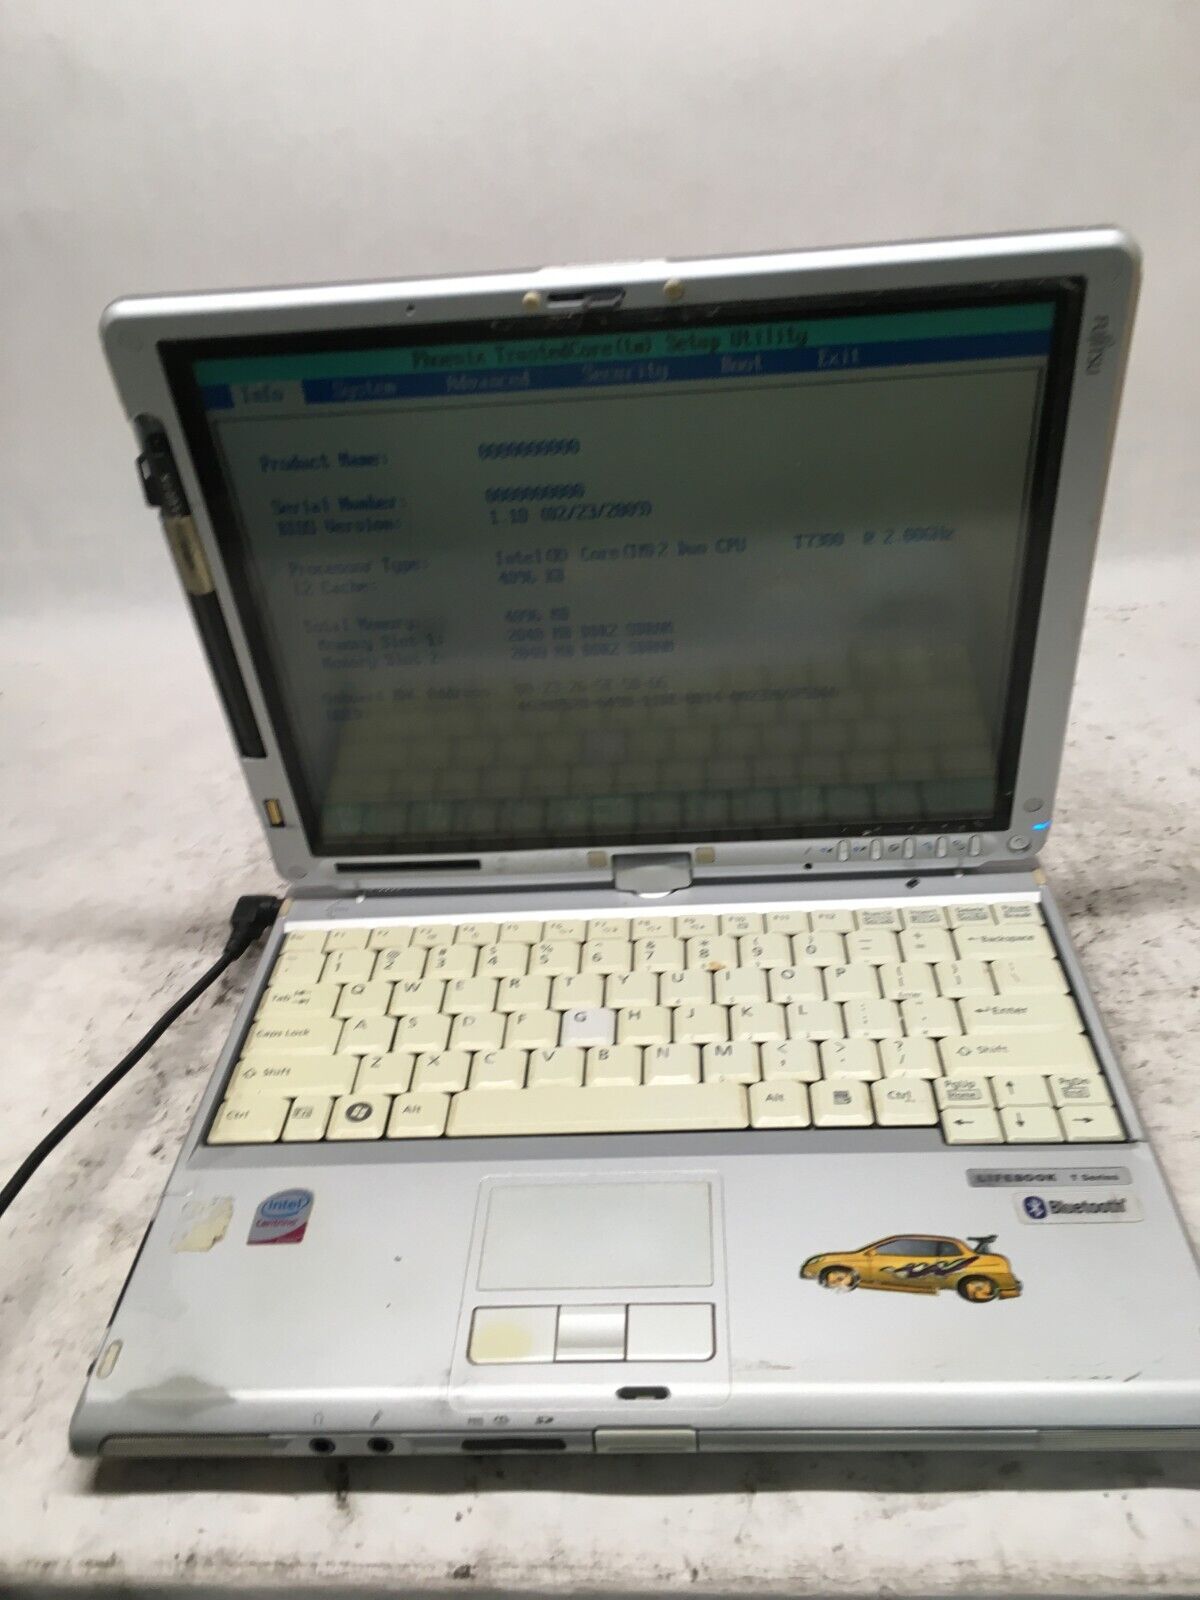 Fujitsu Lifebook T4220 [AS IS] Intel Core 2 Duo T7300 @ 2 GHz - JZ